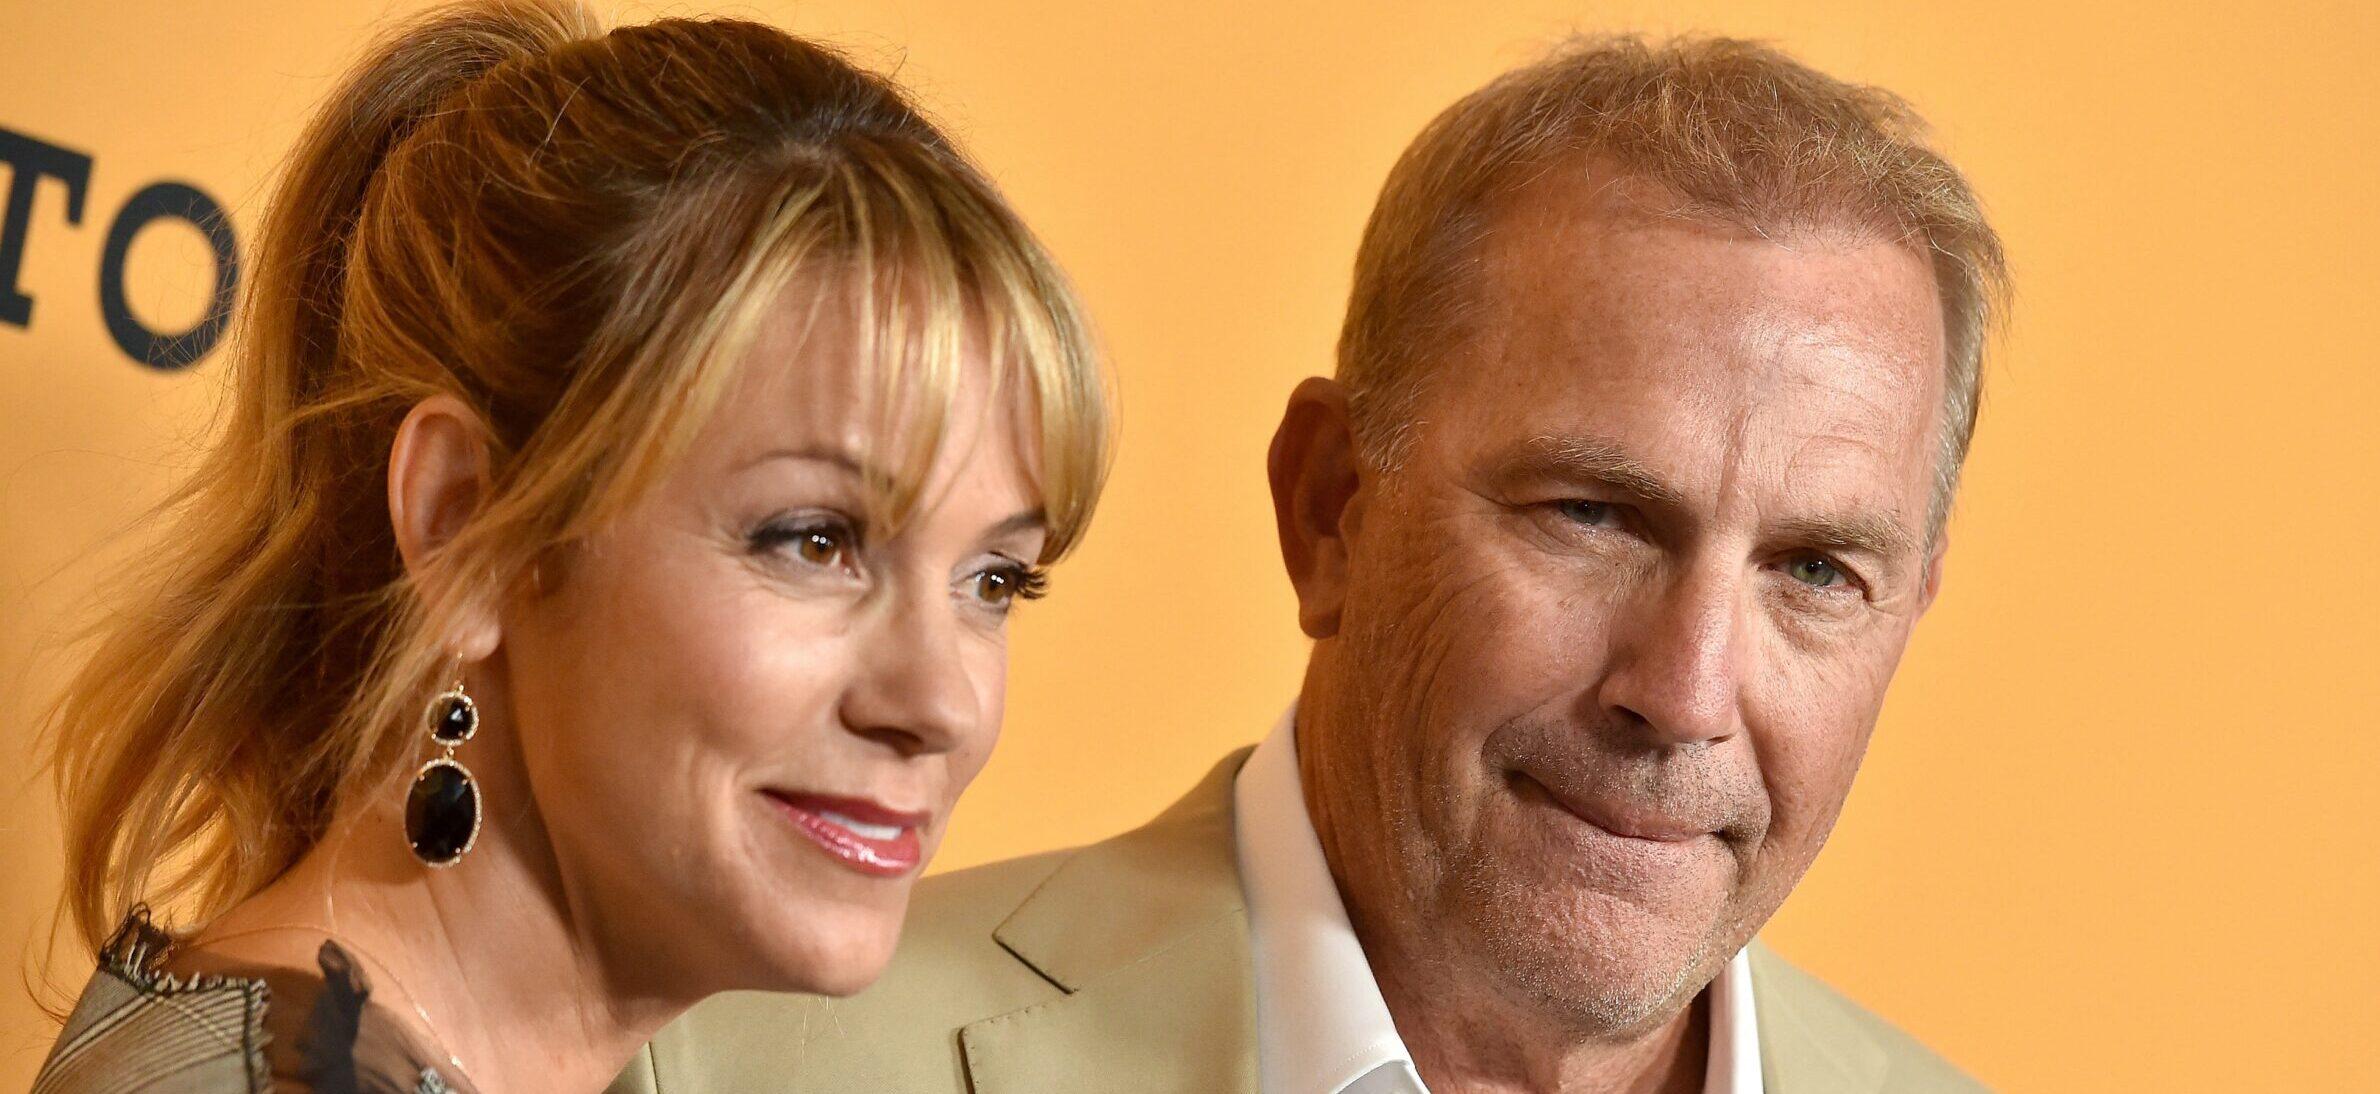 Kevin Costner Calls Out Estranged Wife’s ‘Stalling Tactics’ As Divorce Drama Drags Out